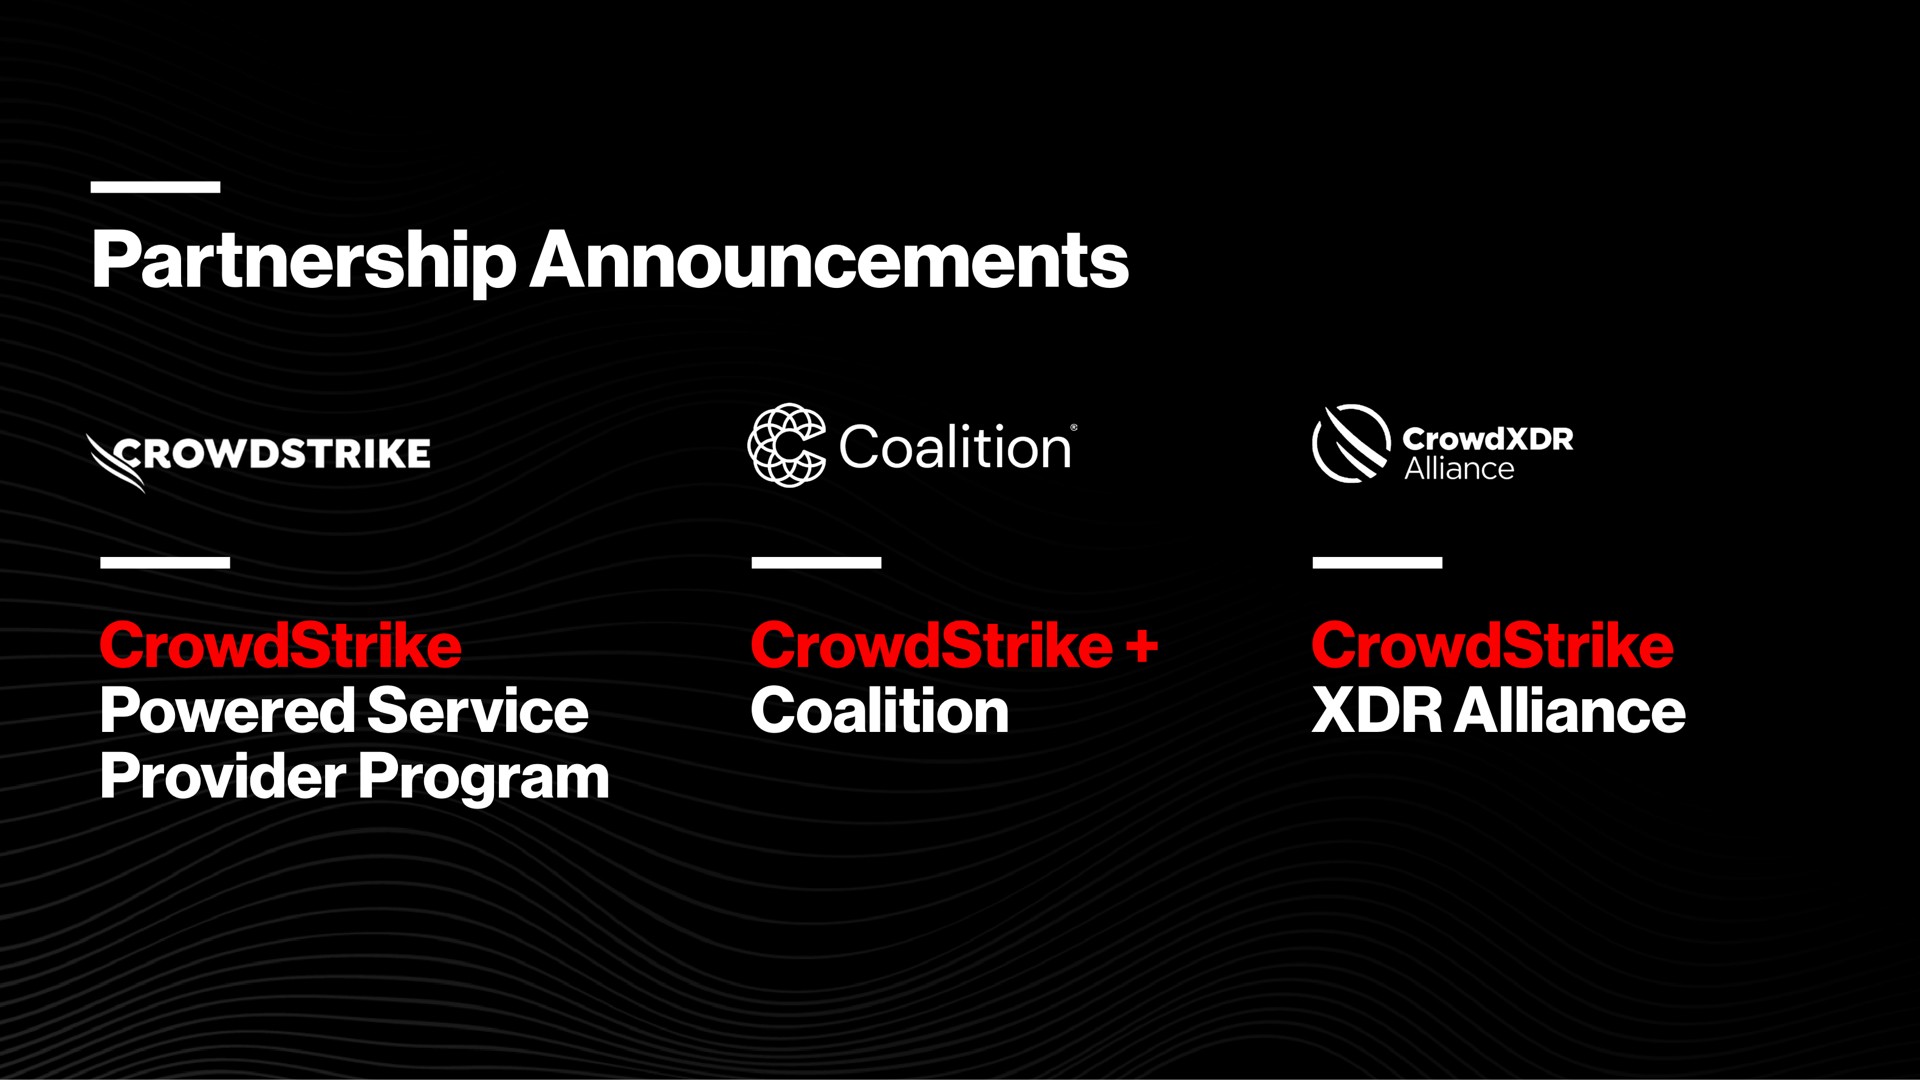 partnership announcements powered service provider program coalition alliance cay | Crowdstrike